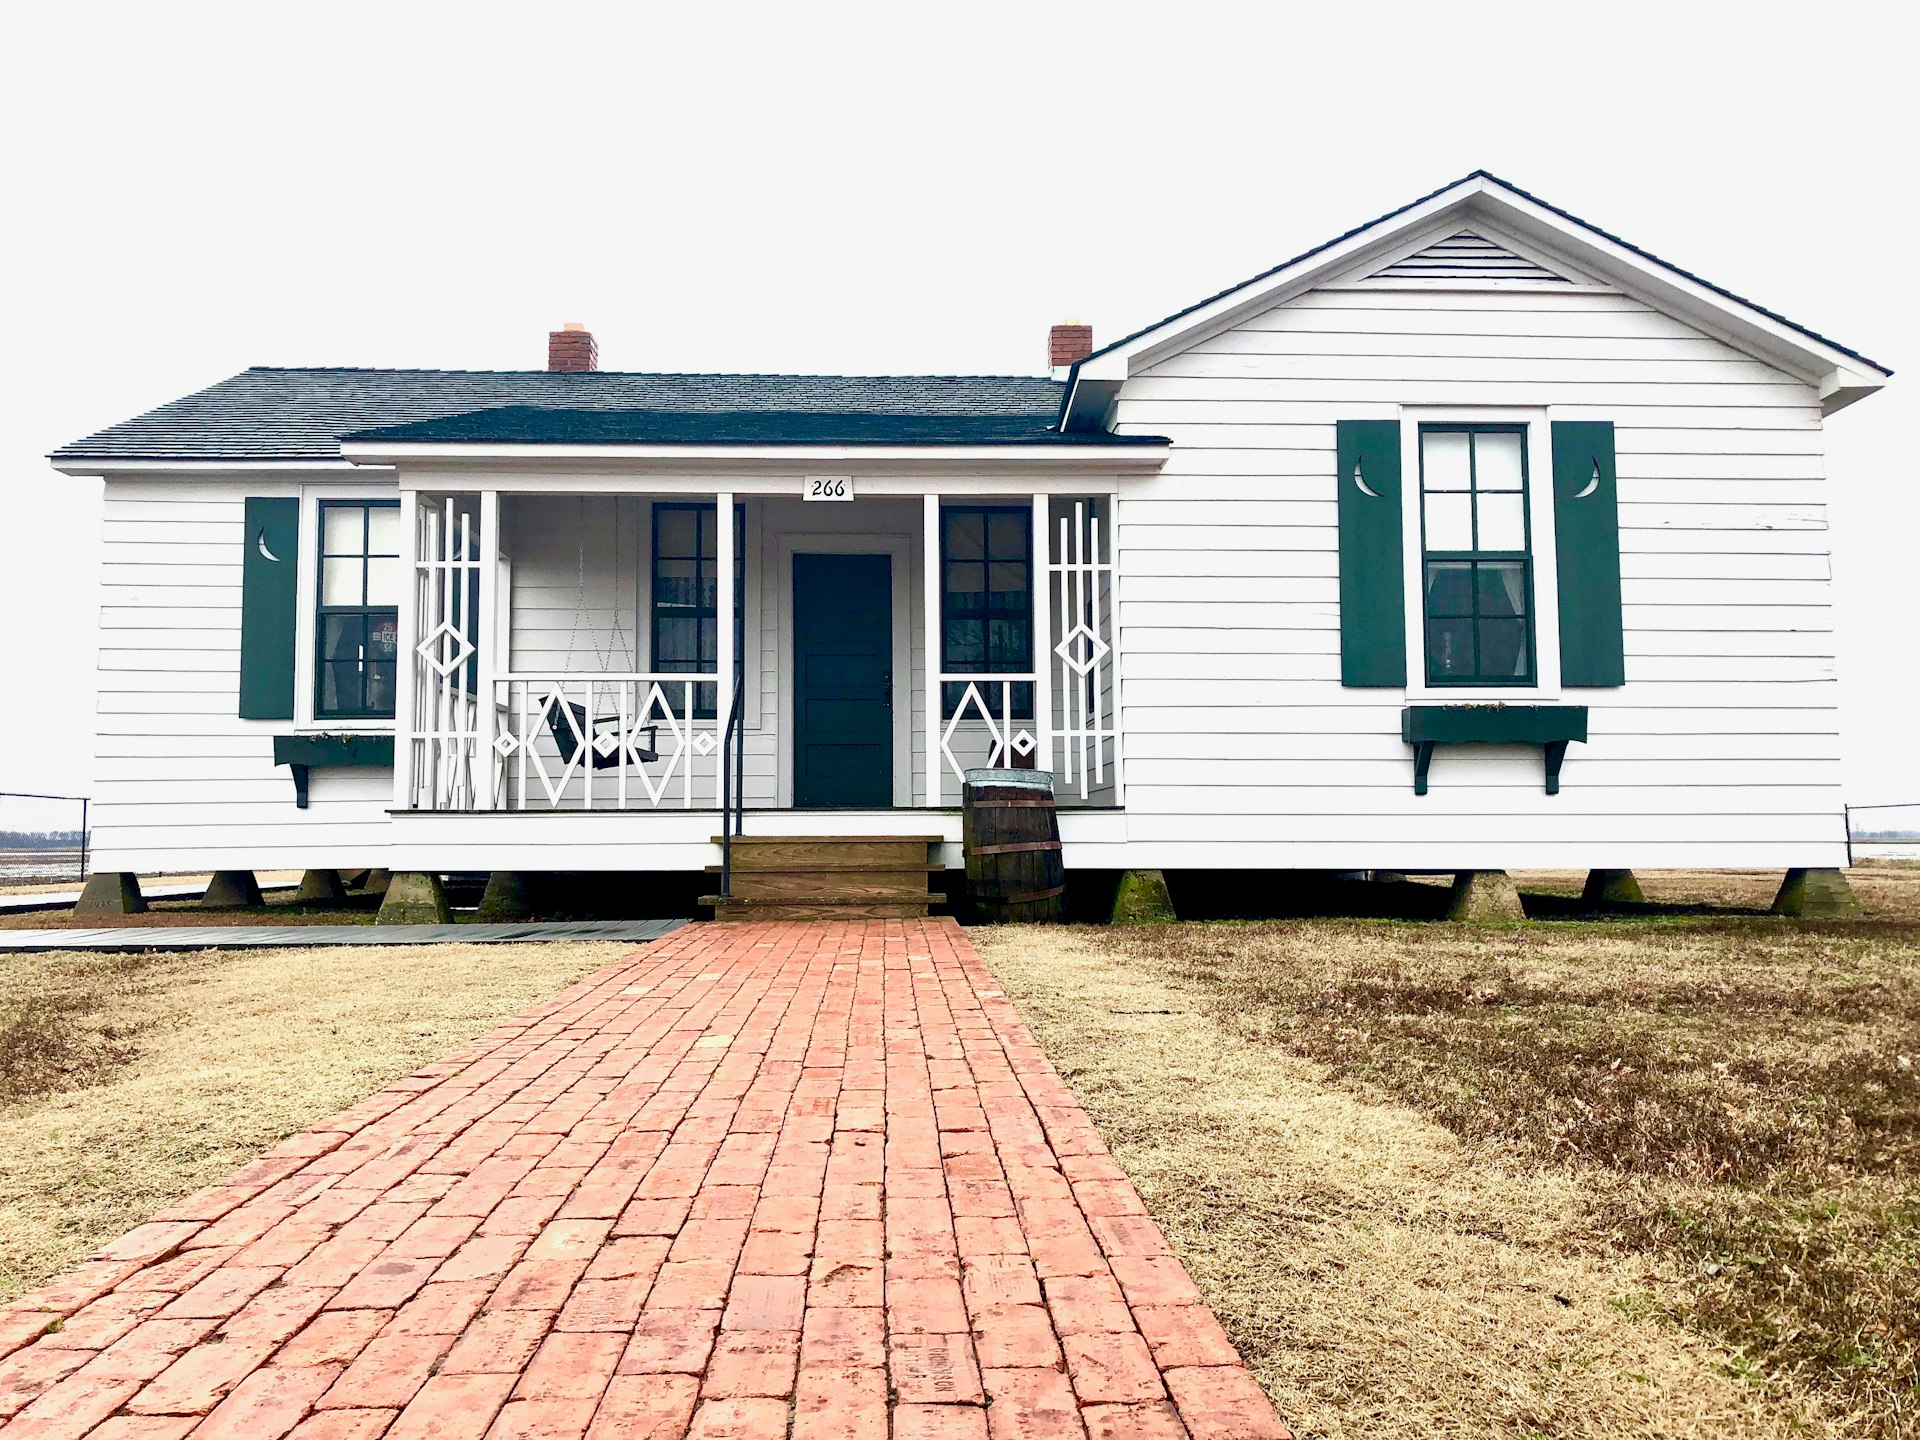 Johnny Cash's boyhood home, a white farmhouse with a front porch swing